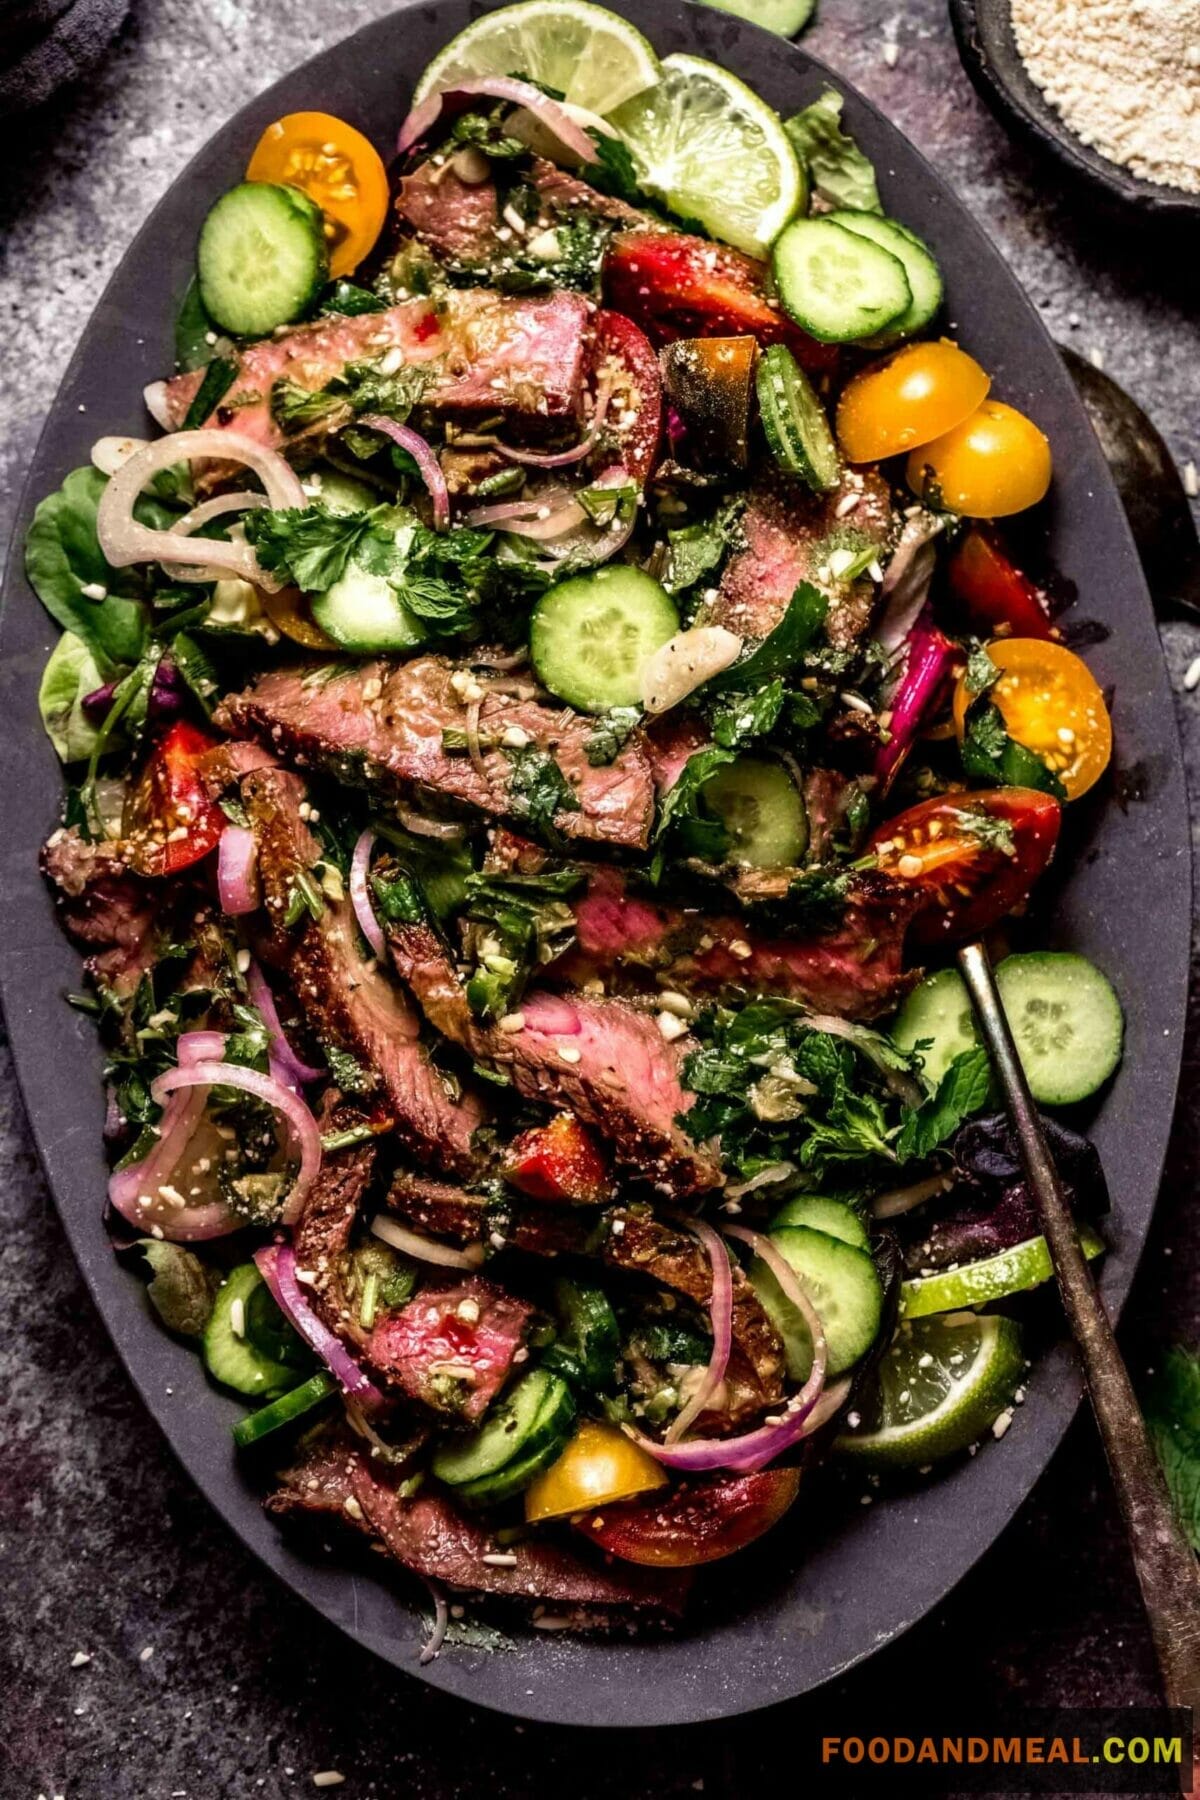 Thai Coconut And Beef Salad